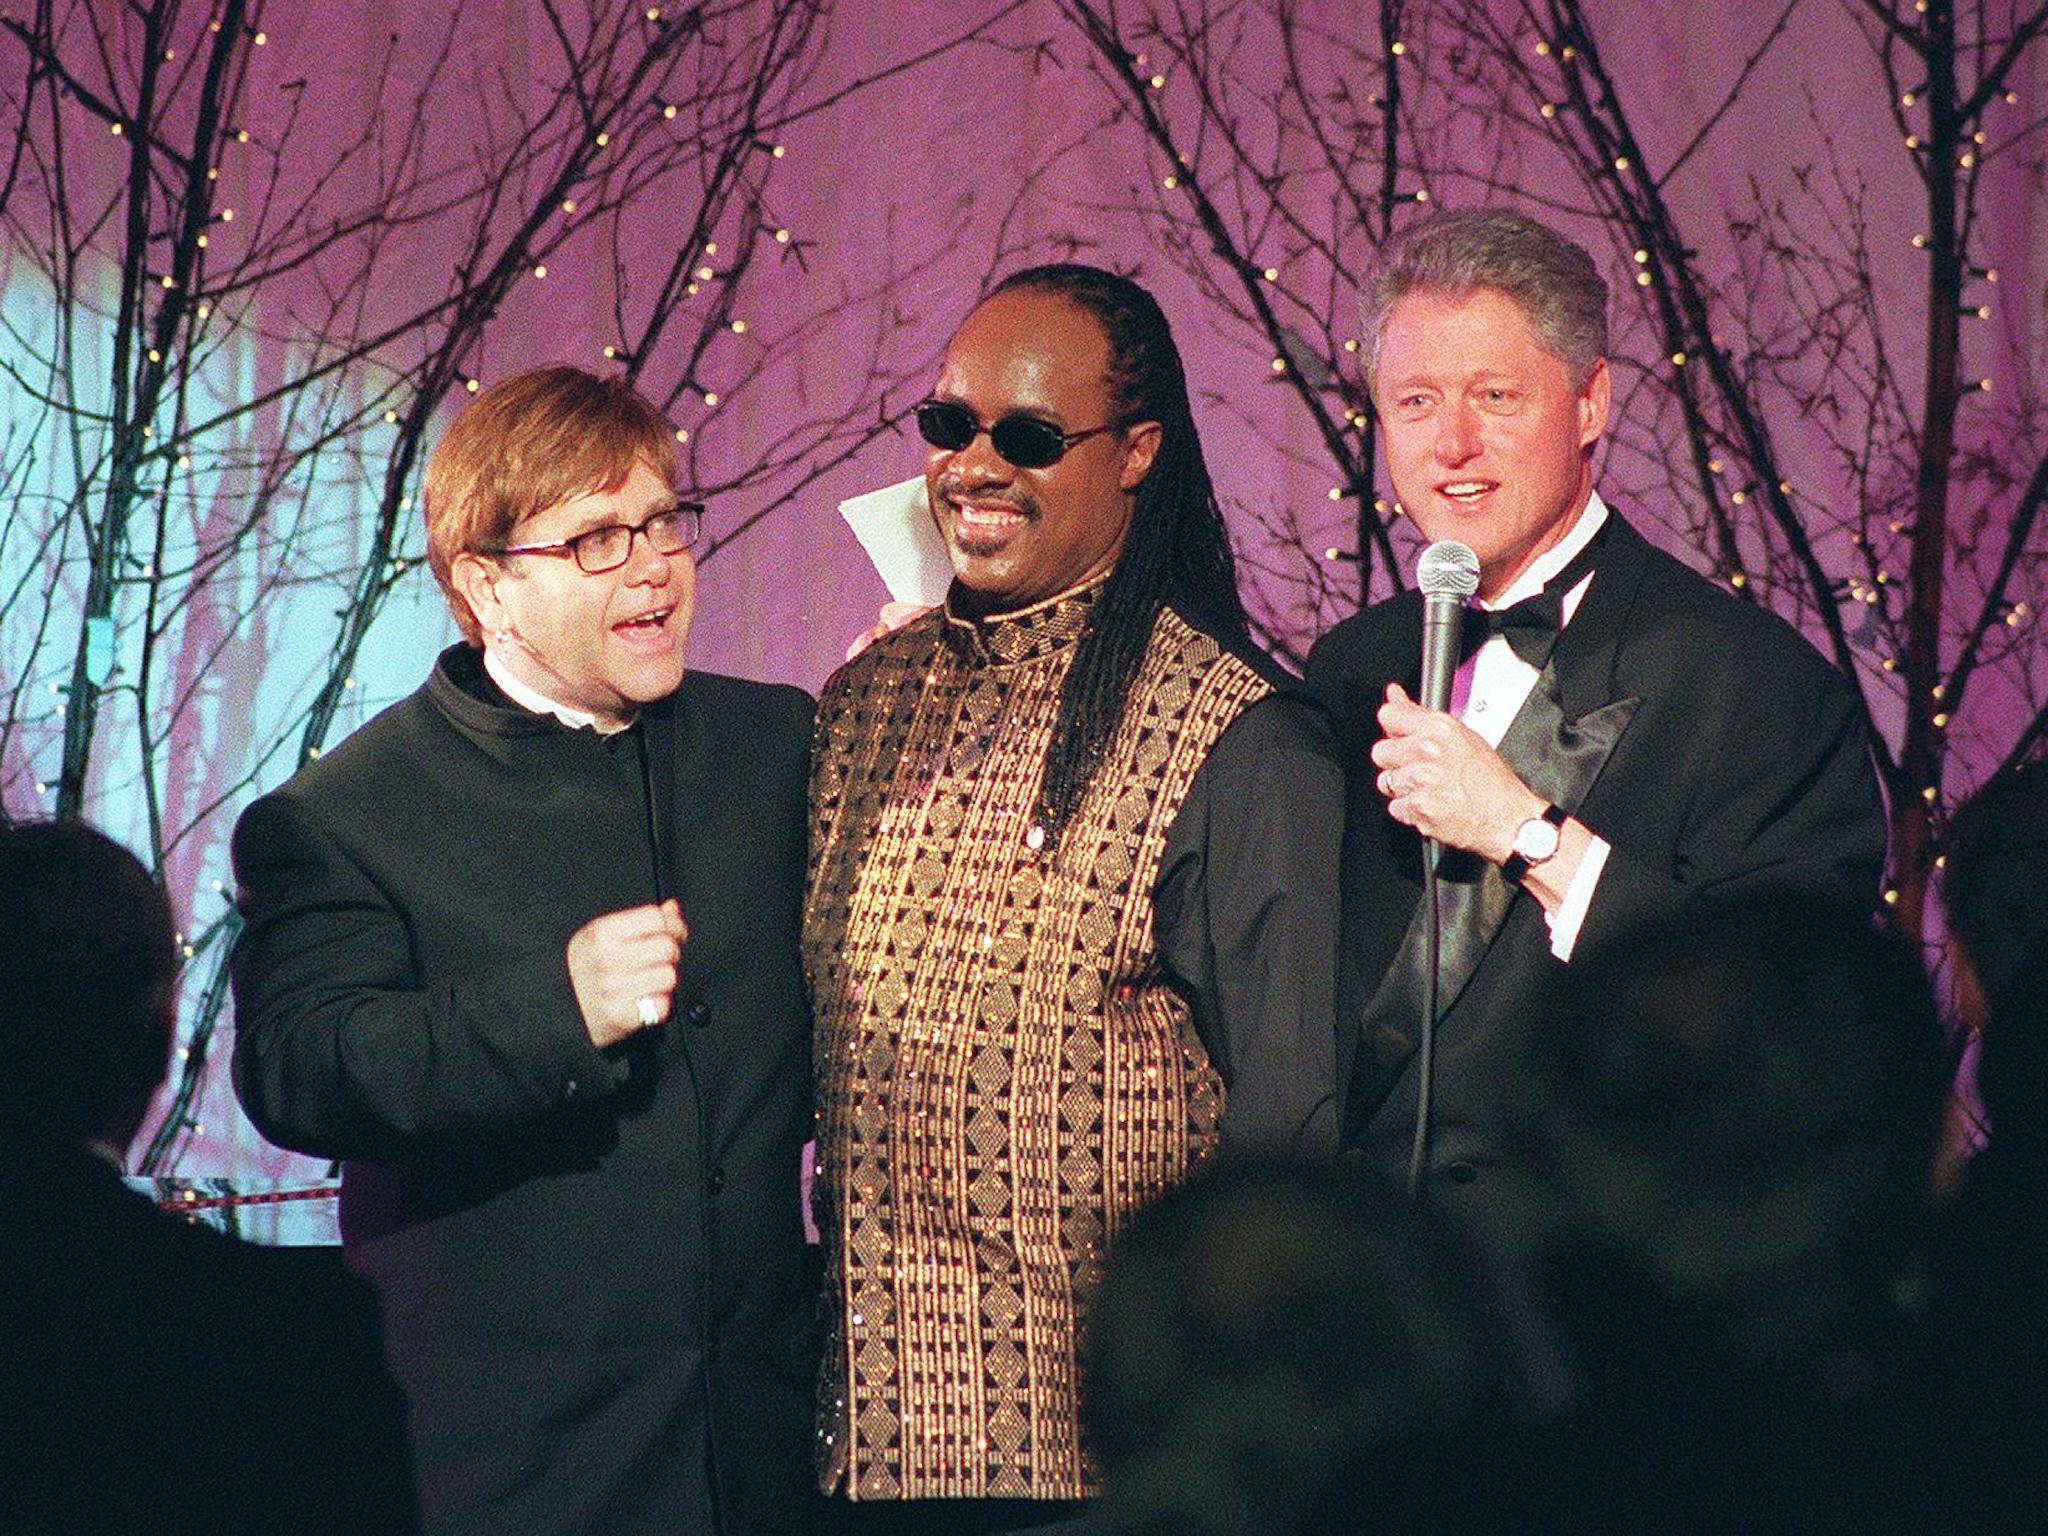 US president Bill Clinton thanks Elton John and Stevie Wonder after they performed at an official dinner in honour of Tony Blair in February 1998